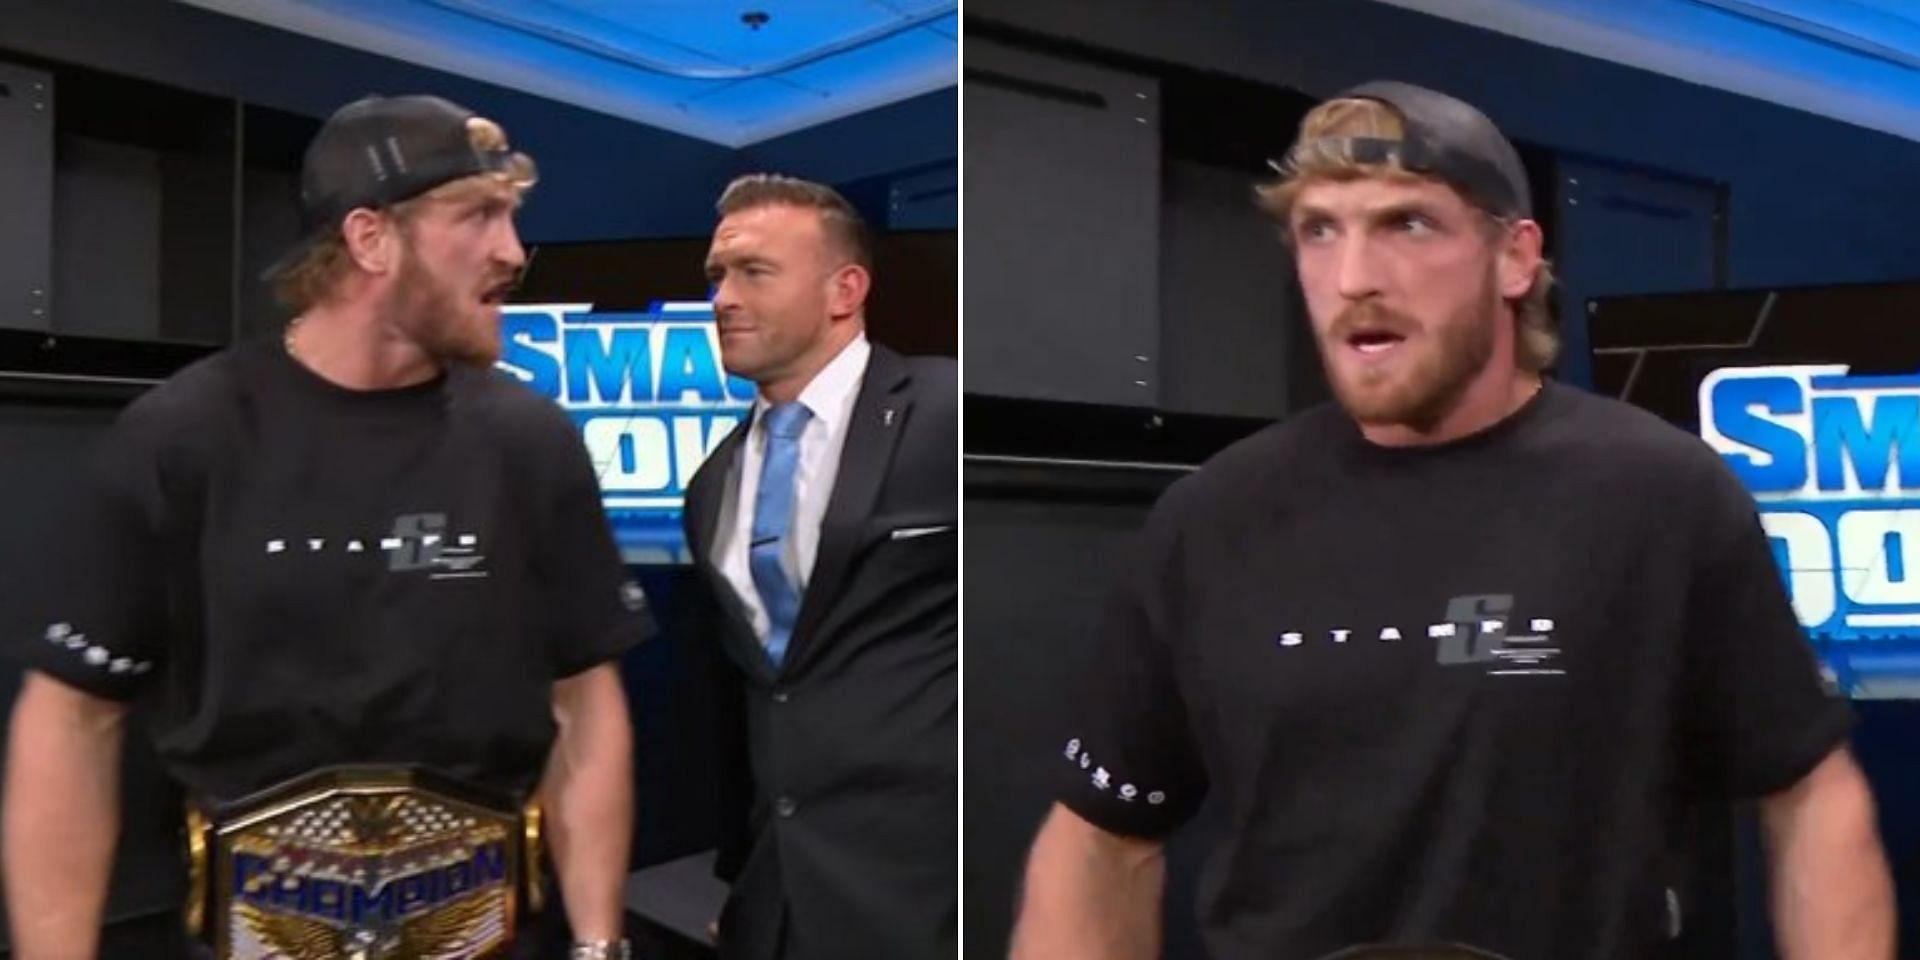 Logan Paul will compete on SmackDown for the first time next week